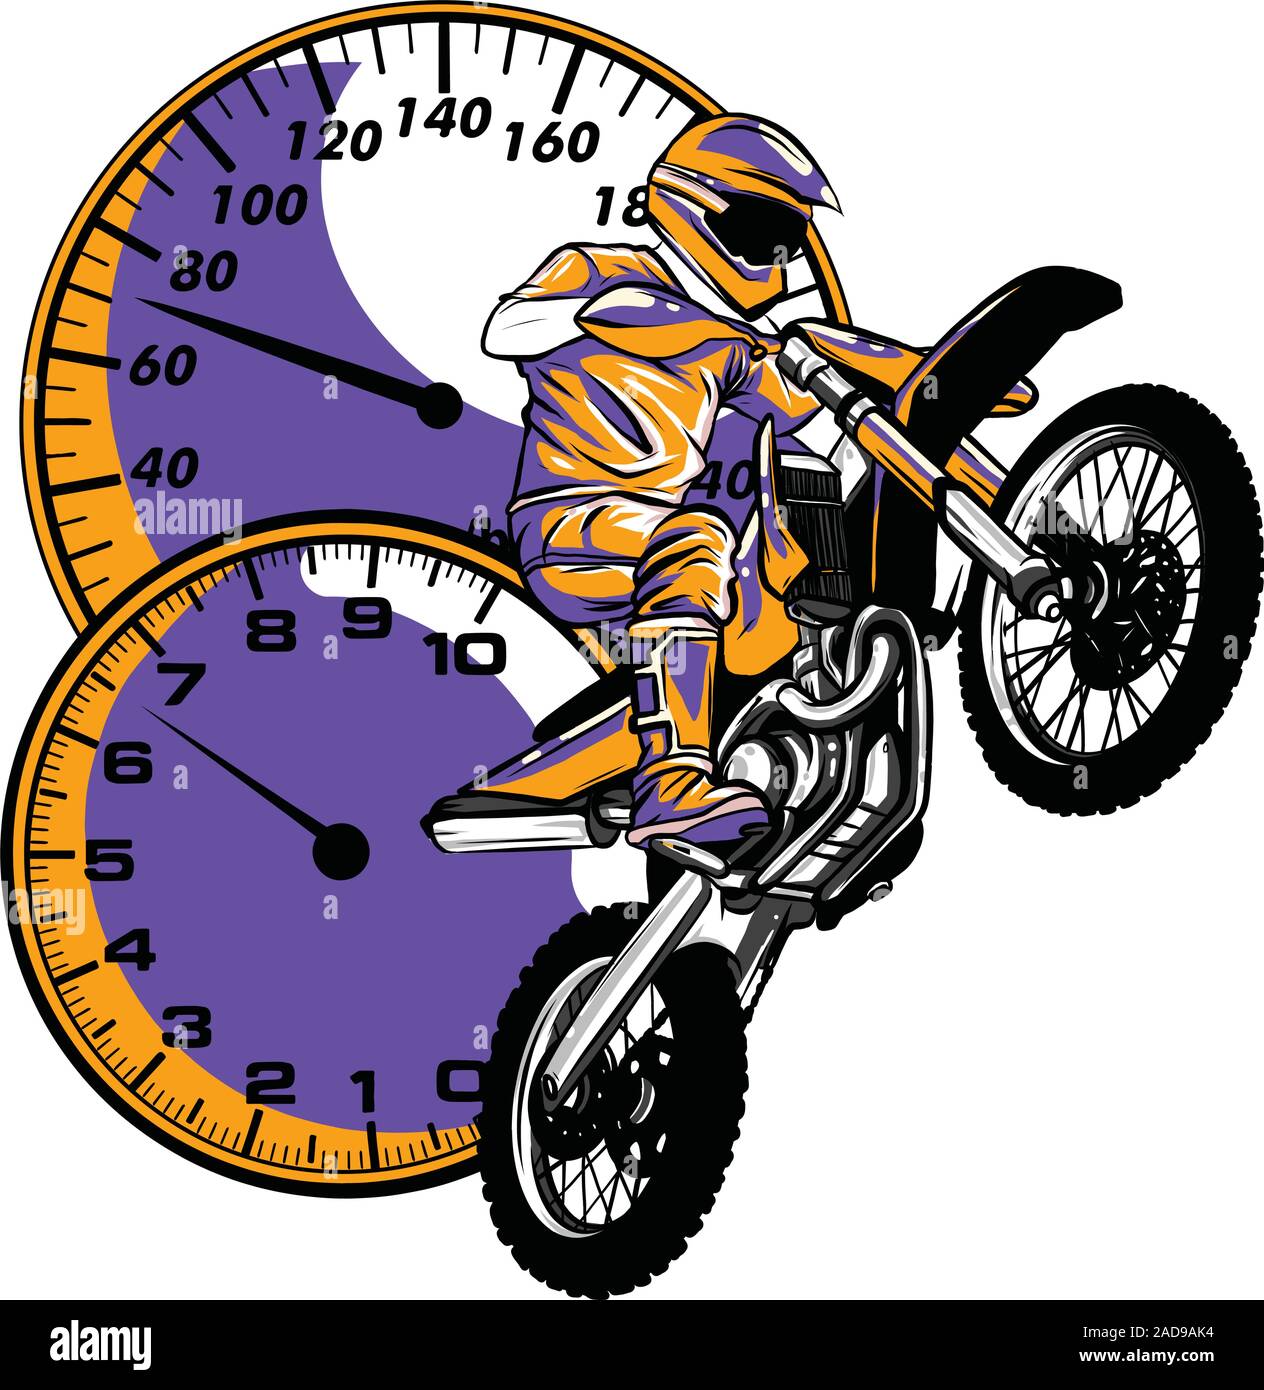 Motorbike rider, abstract vector silhouette. Road motorcycle racing Stock Vector